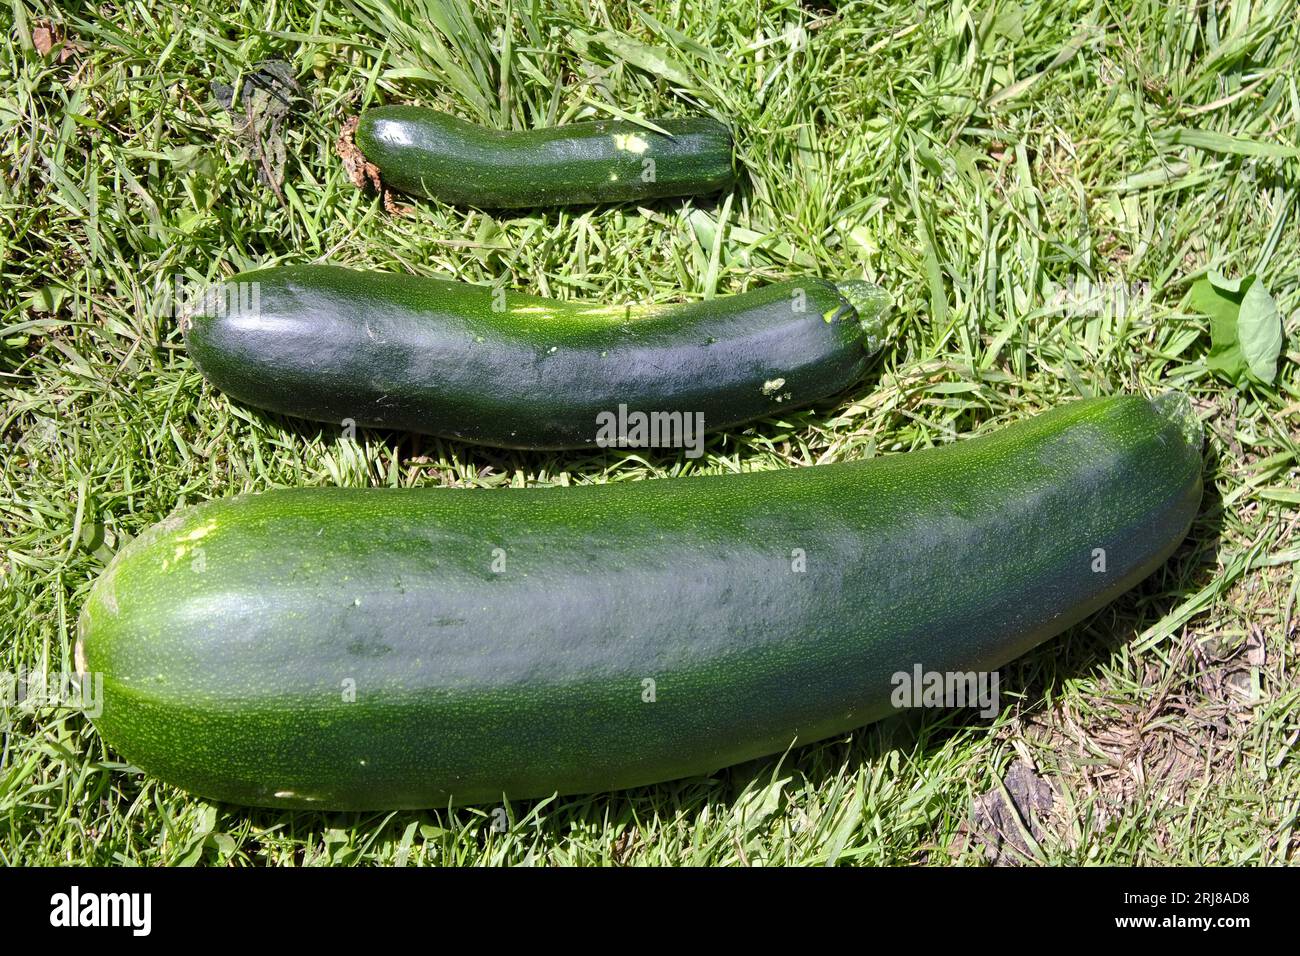 Three sizes of Courgette from the same plant, ranging from small to large Marrow Stock Photo